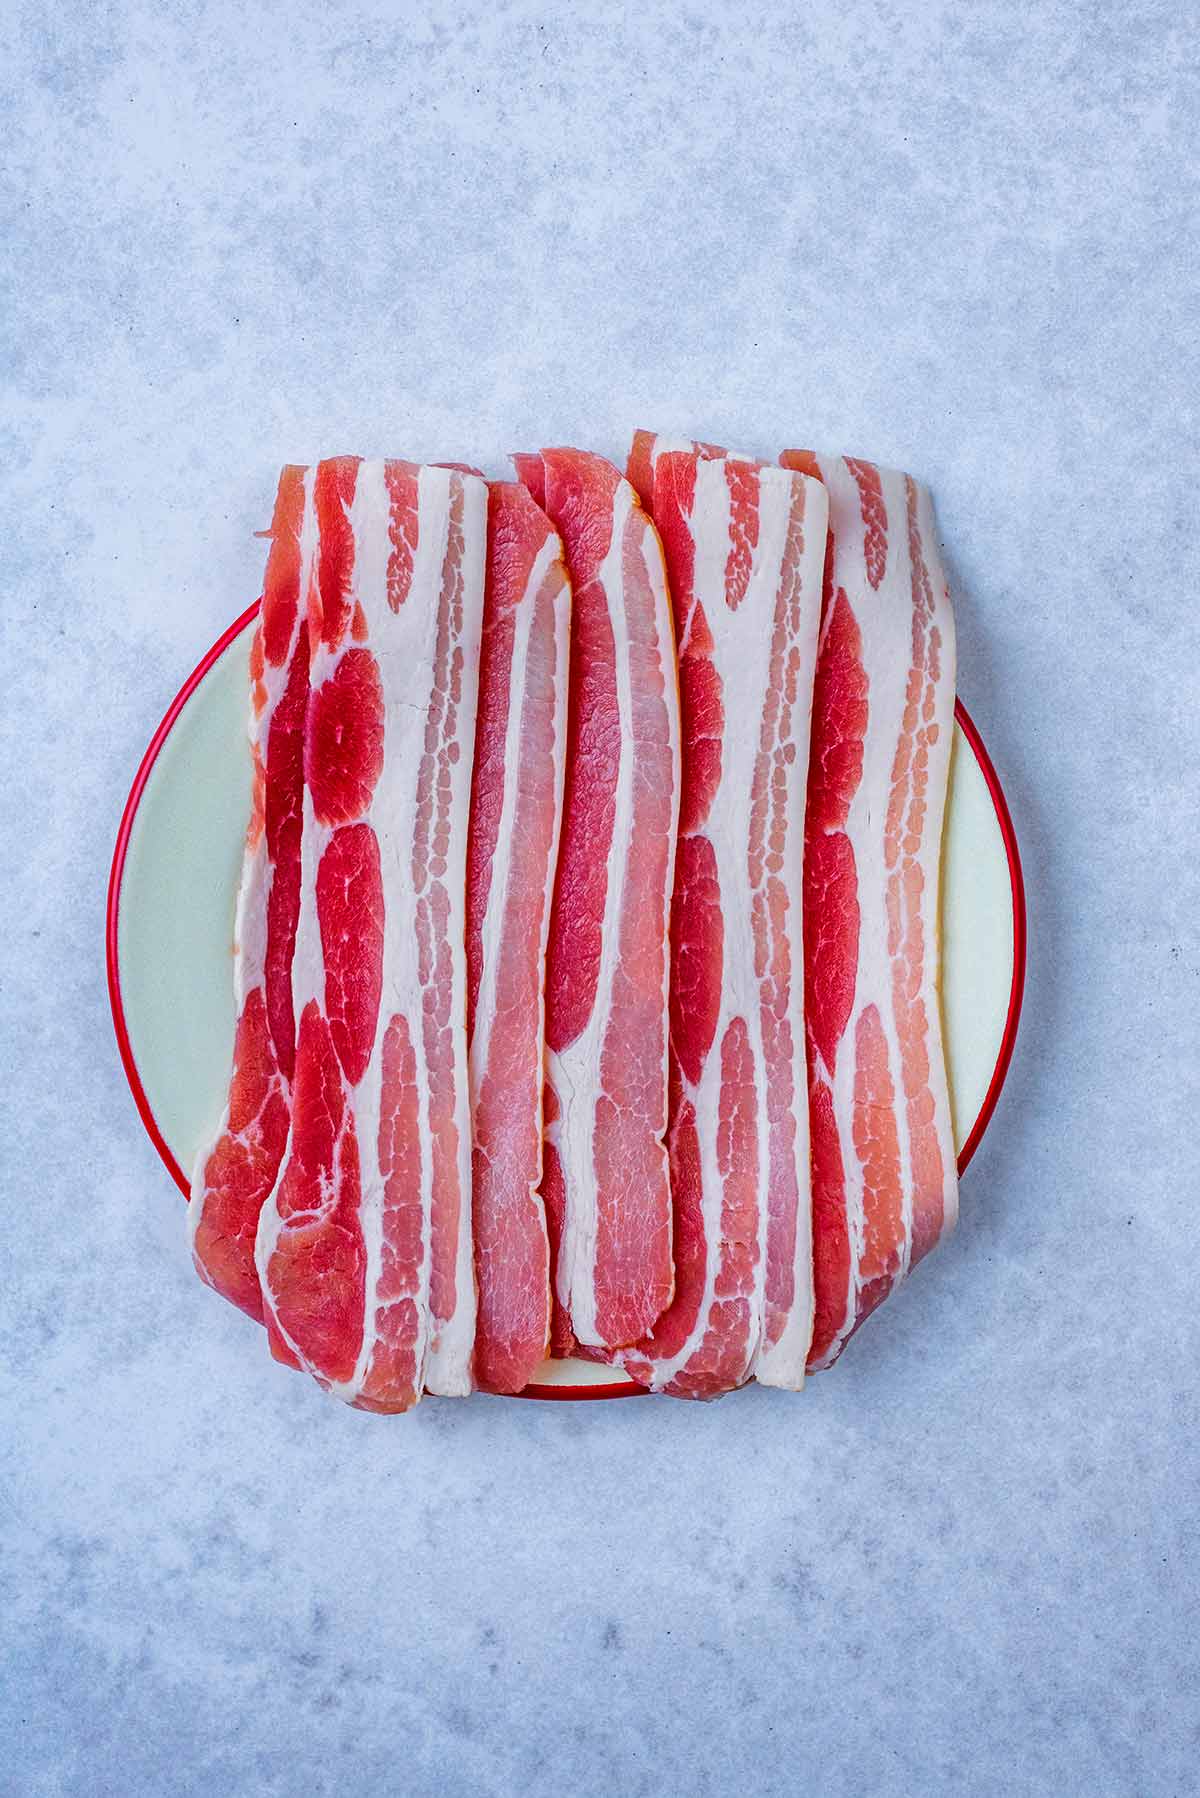 A plate with uncooked rashers of bacon on it.